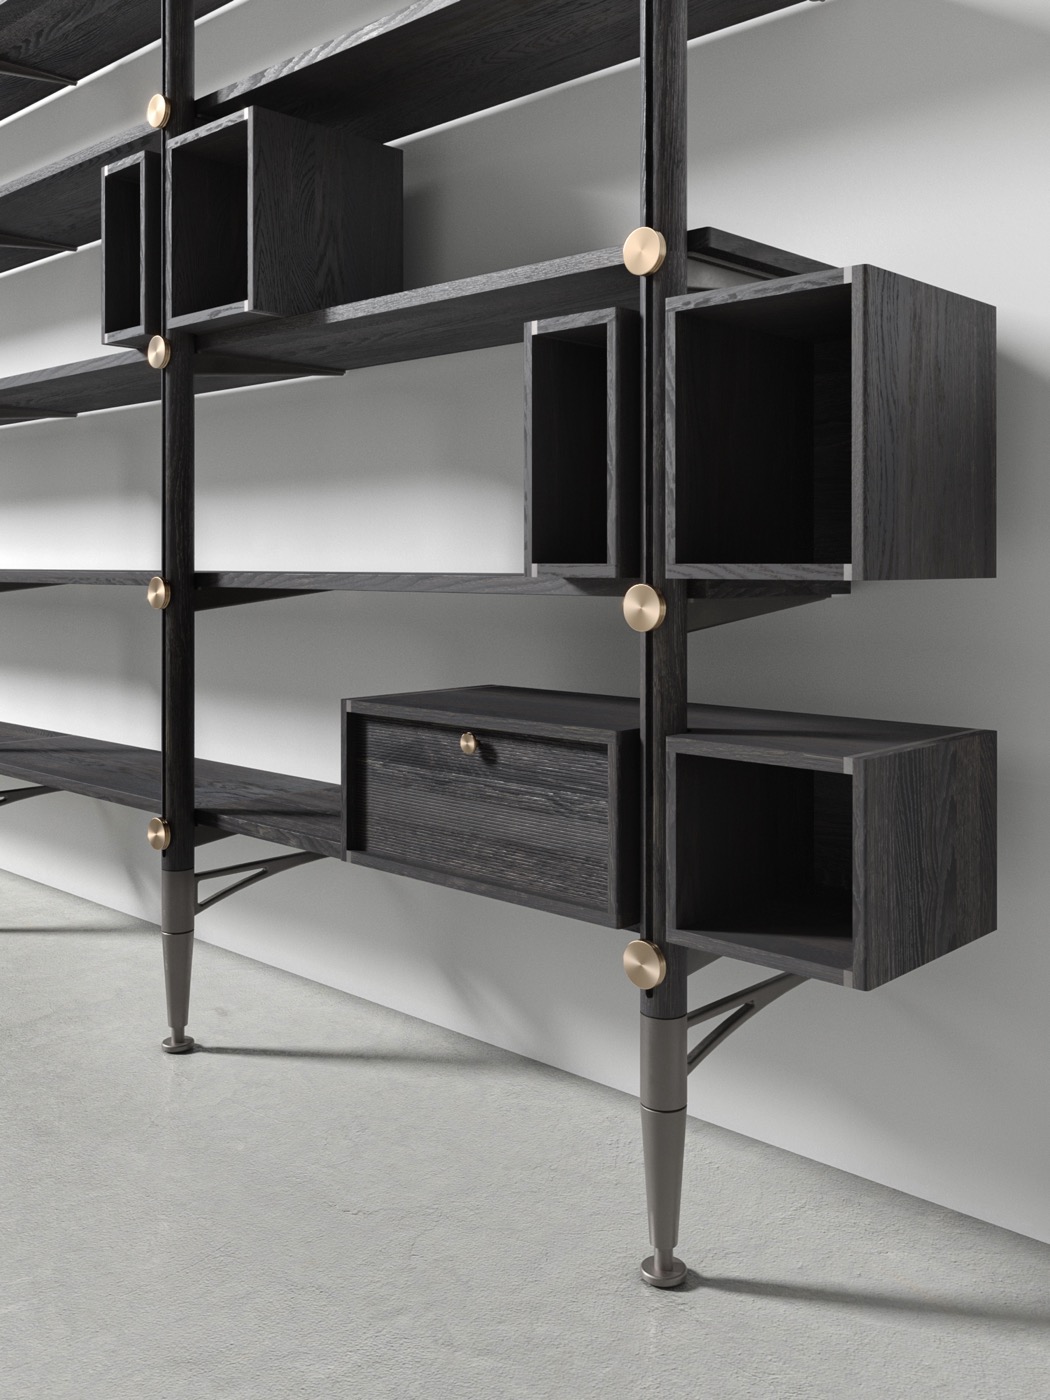 Inumbra Shelving System – Wall Mount